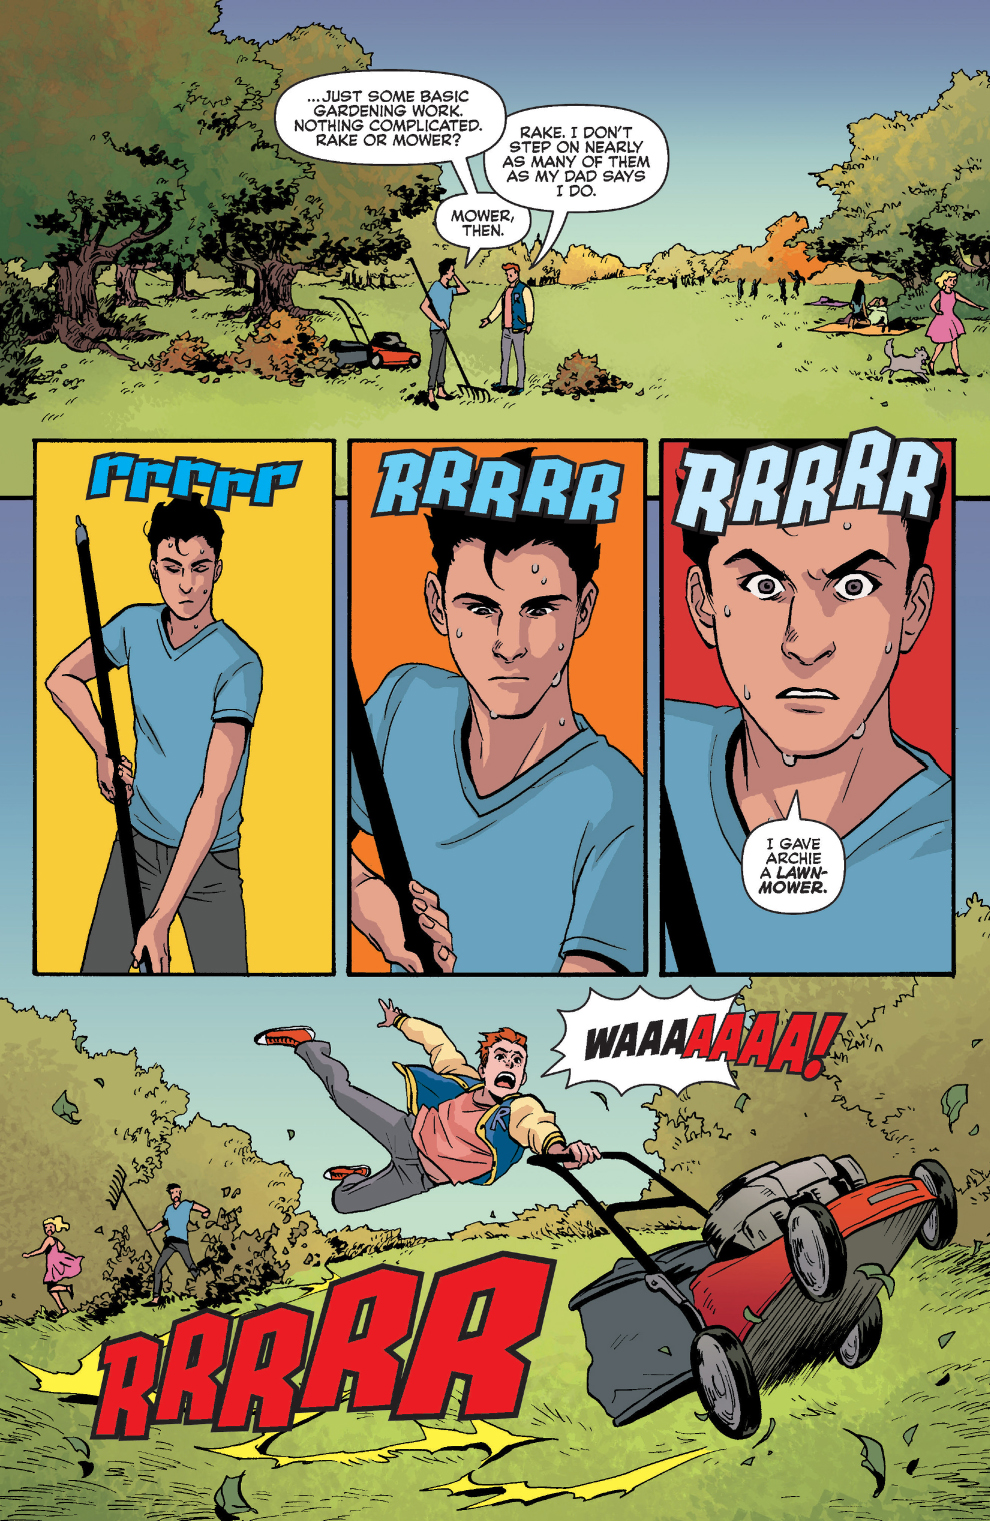 How Clumsy Archie Andrews Is 